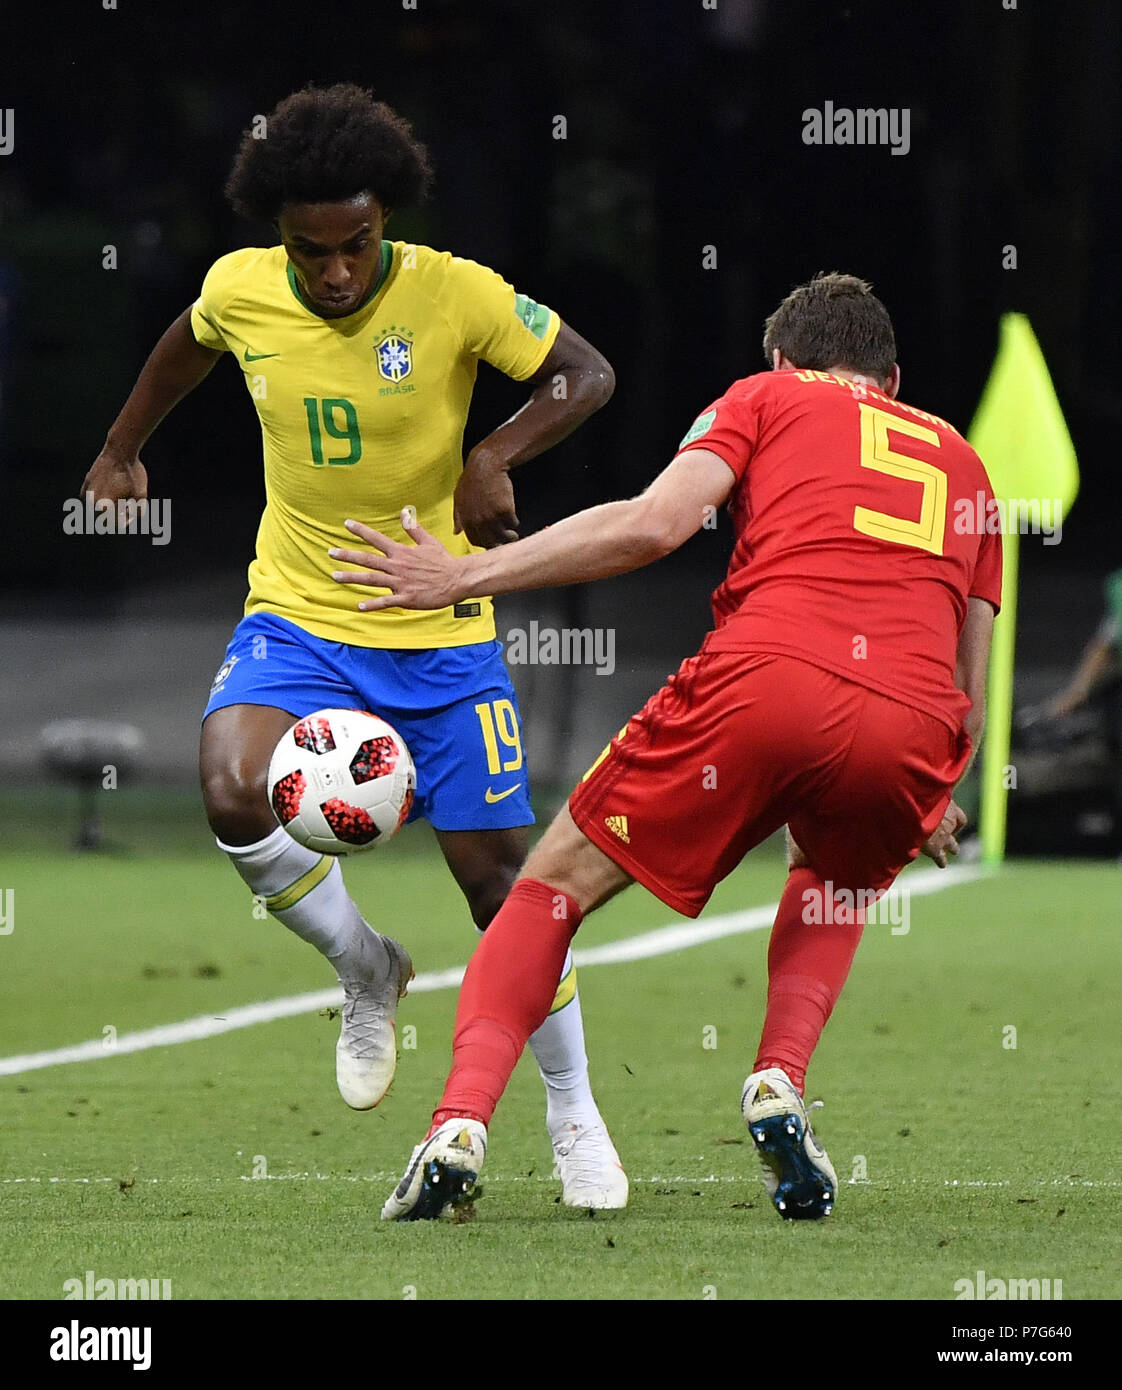 Kazan, Russia. 6th July, 2018. Willian (L) of Brazil vies with Jan Vertonghen of Belgium during the 2018 FIFA World Cup quarter-final match between Brazil and Belgium in Kazan, Russia, July 6, 2018. Credit: He Canling/Xinhua/Alamy Live News Stock Photo